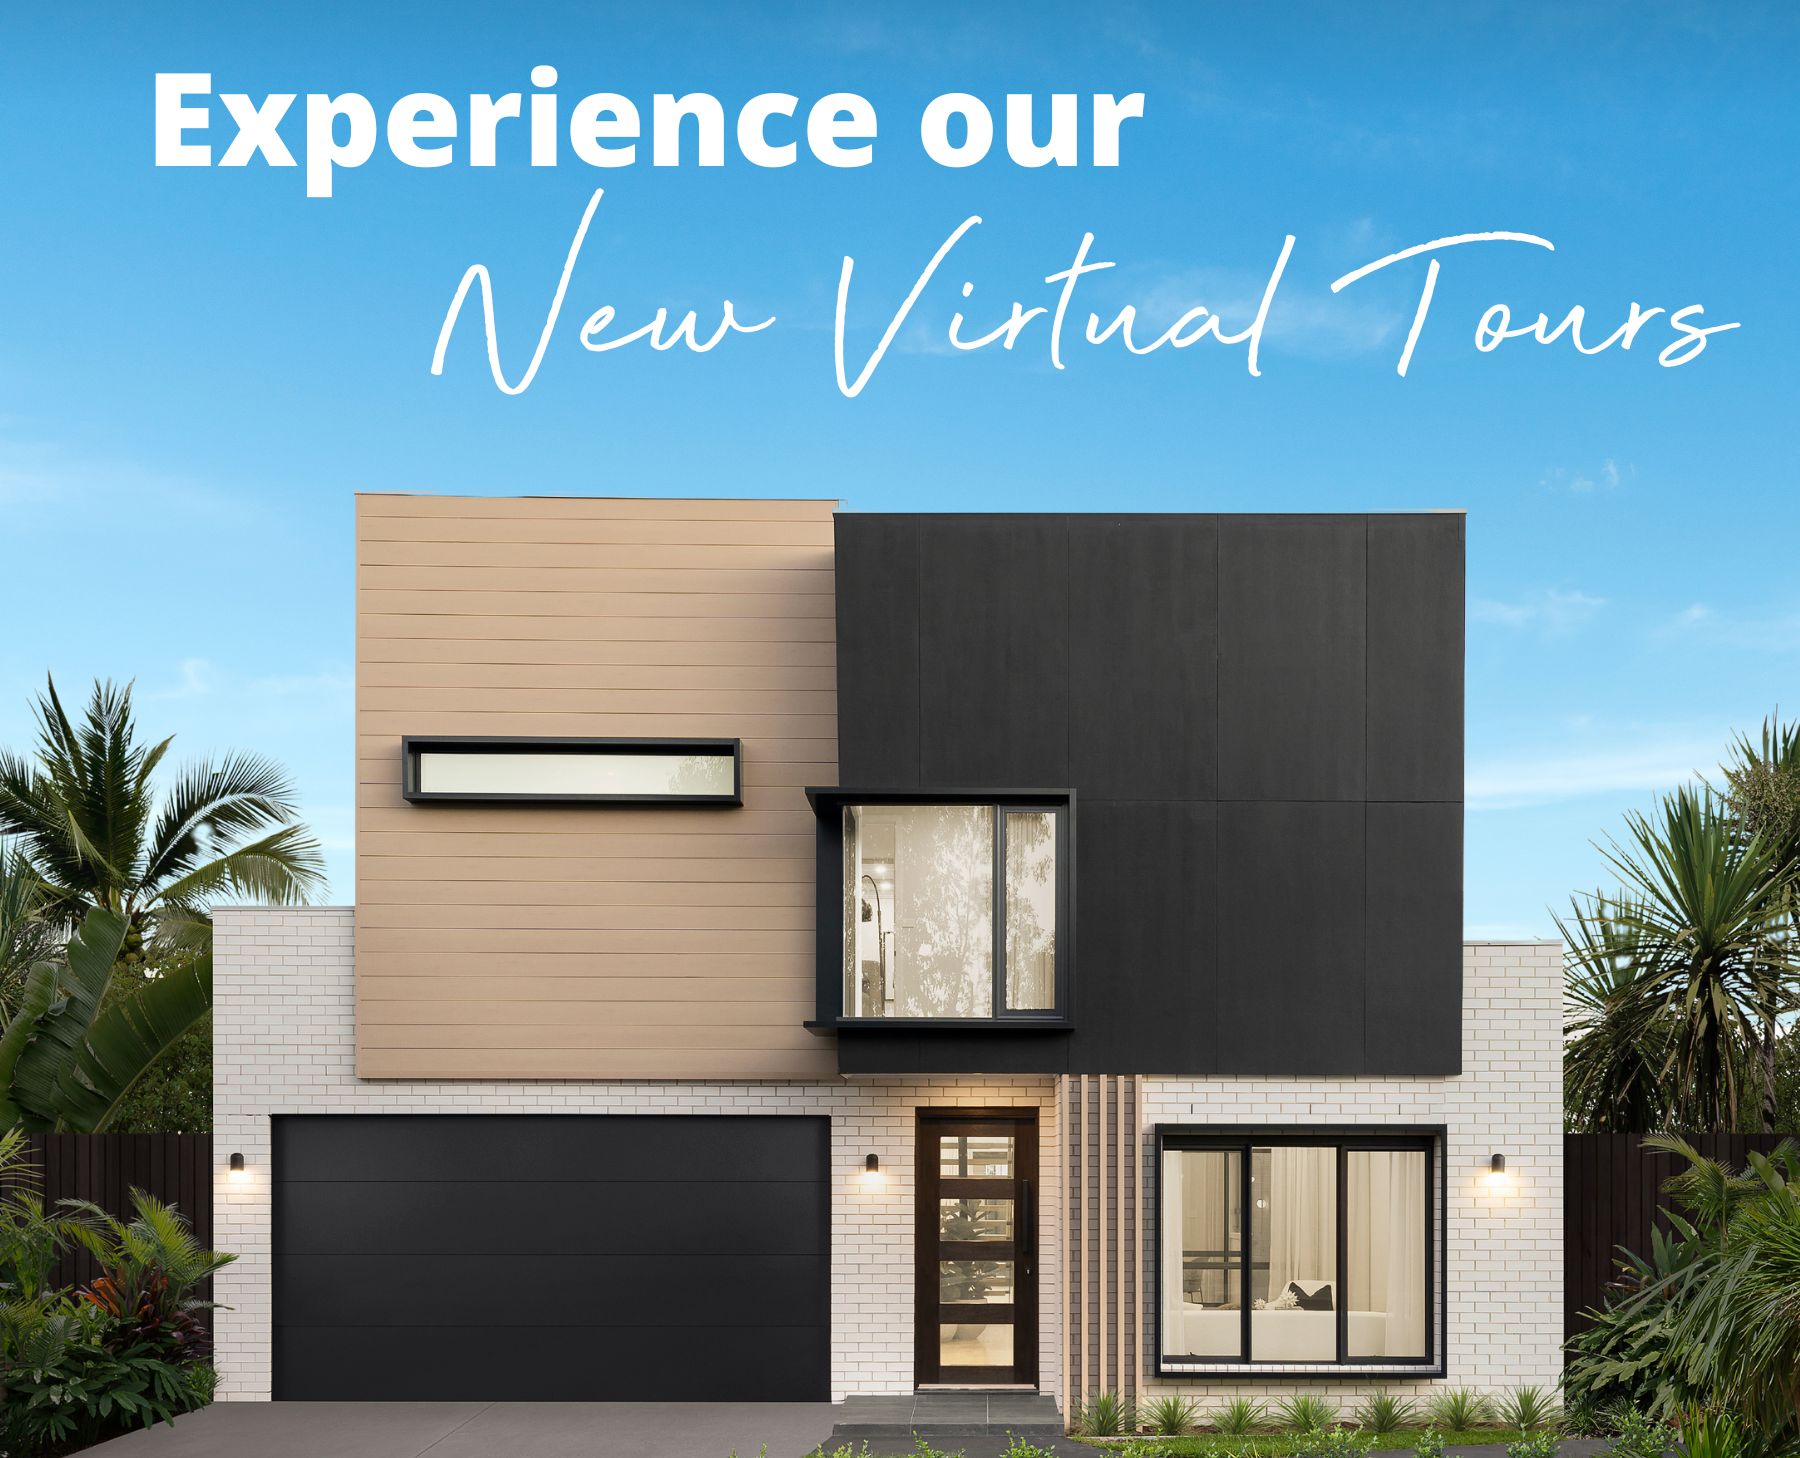 Step Inside Your Dream Home: Explore Our New Virtual Tours